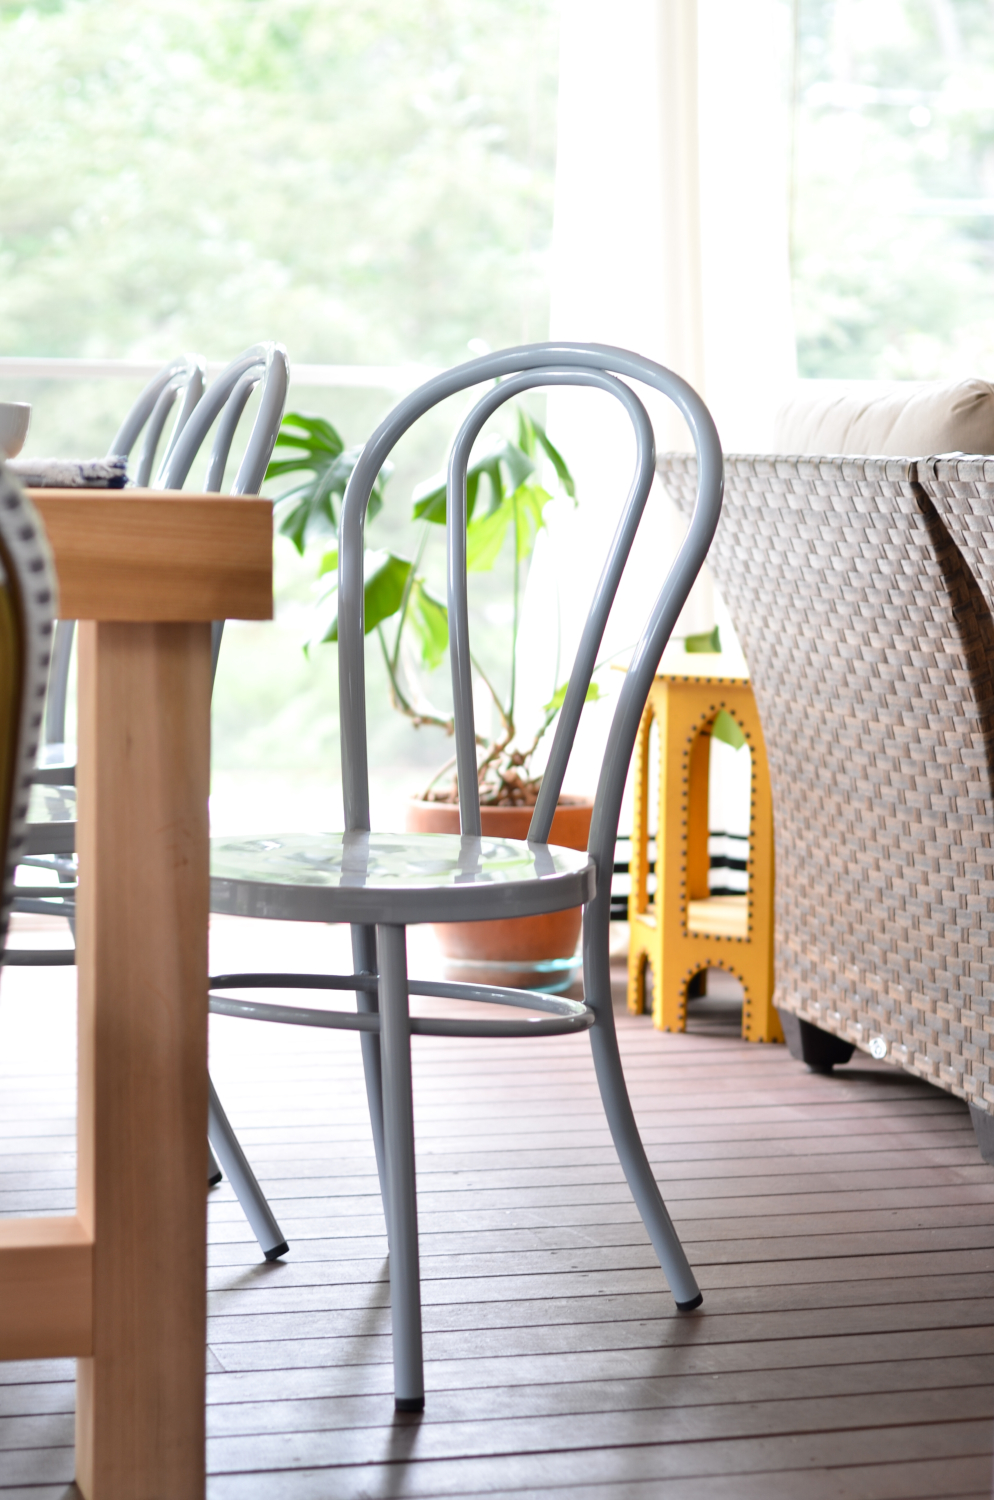 Metal bentwood chairs (that come in nine different colors!) and a DIY outdoor dining table inspired by a $4000 Restoration Hardware table are the perfect finishing touches to this totally gorgeous screened porch!